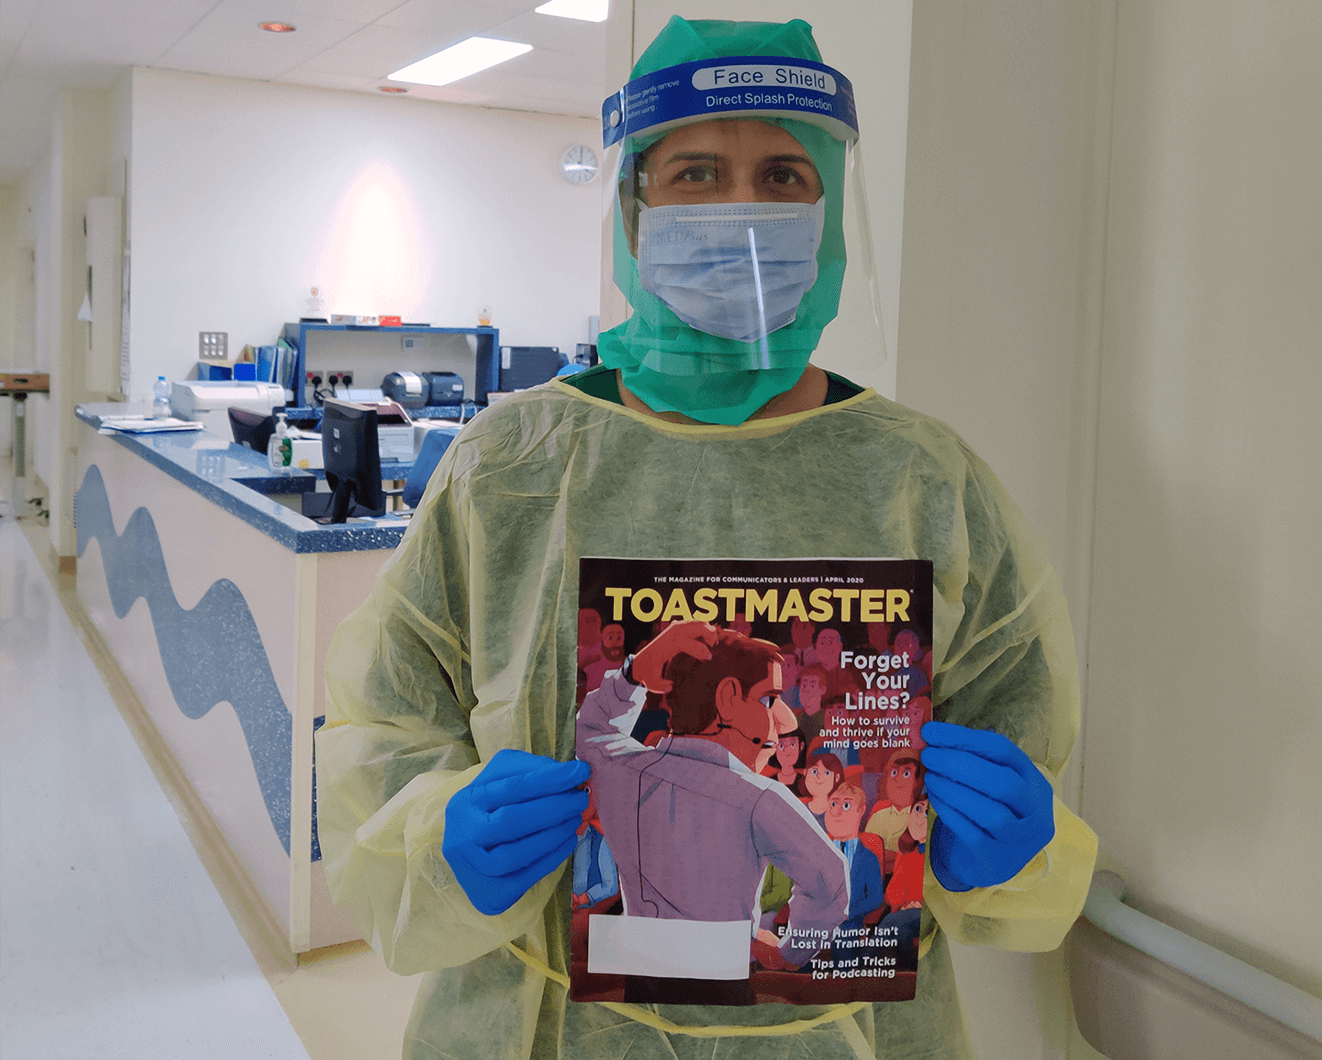 Dr. Sonali Kodange of Muscat, Oman, takes a break with the Toastmaster while working in a hospital intensive care unit during the COVID-19 pandemic.